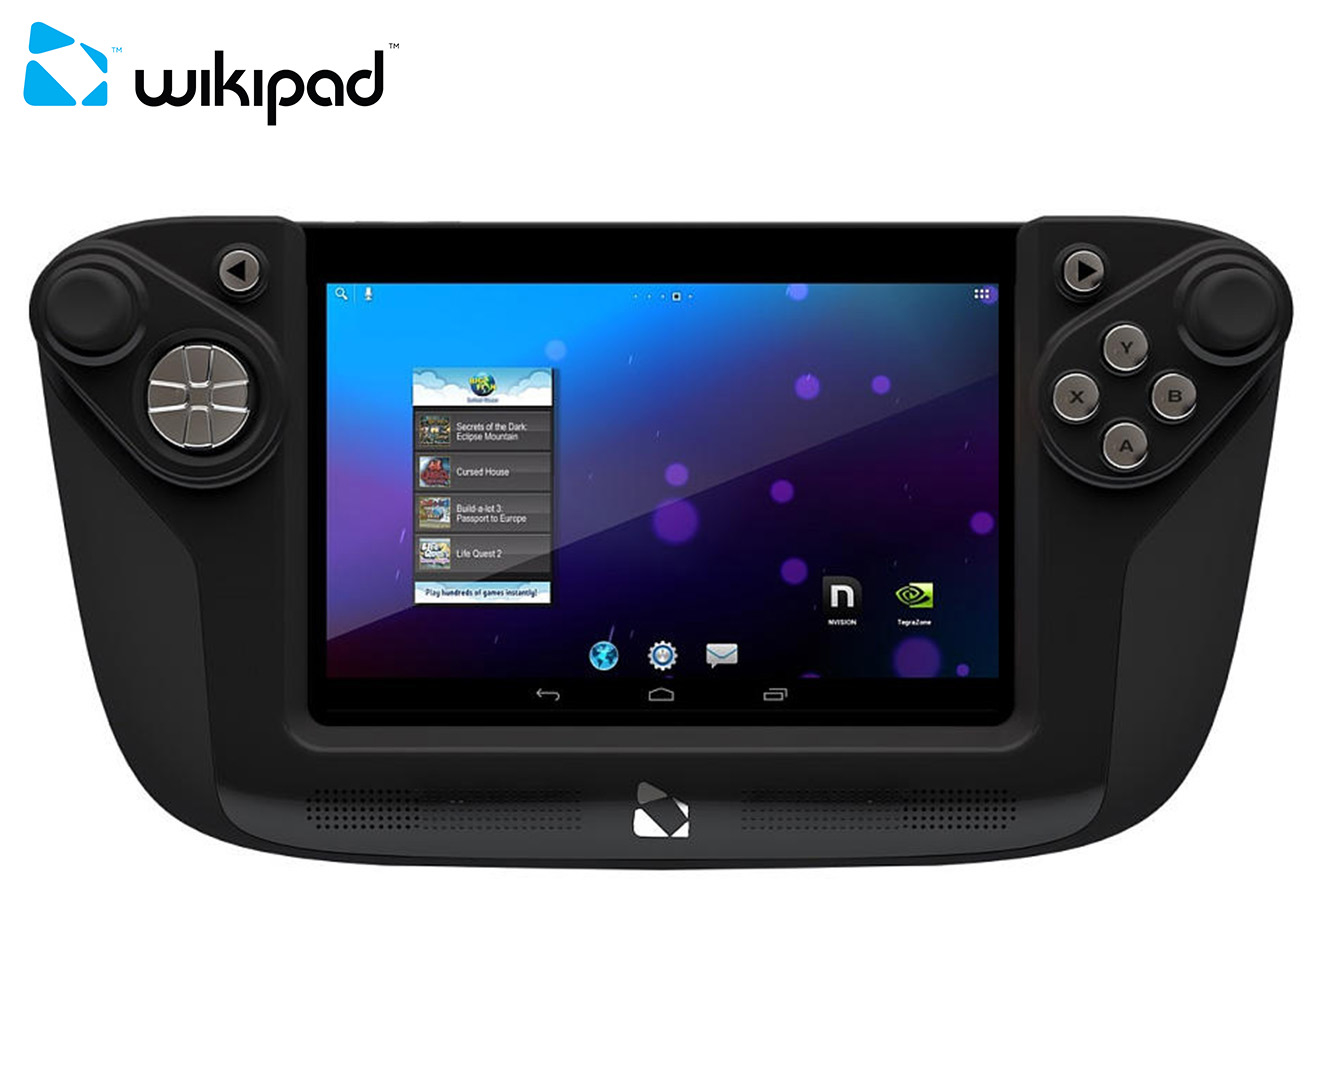 Wikipad 7" Gaming Tablet with Detachable Controller